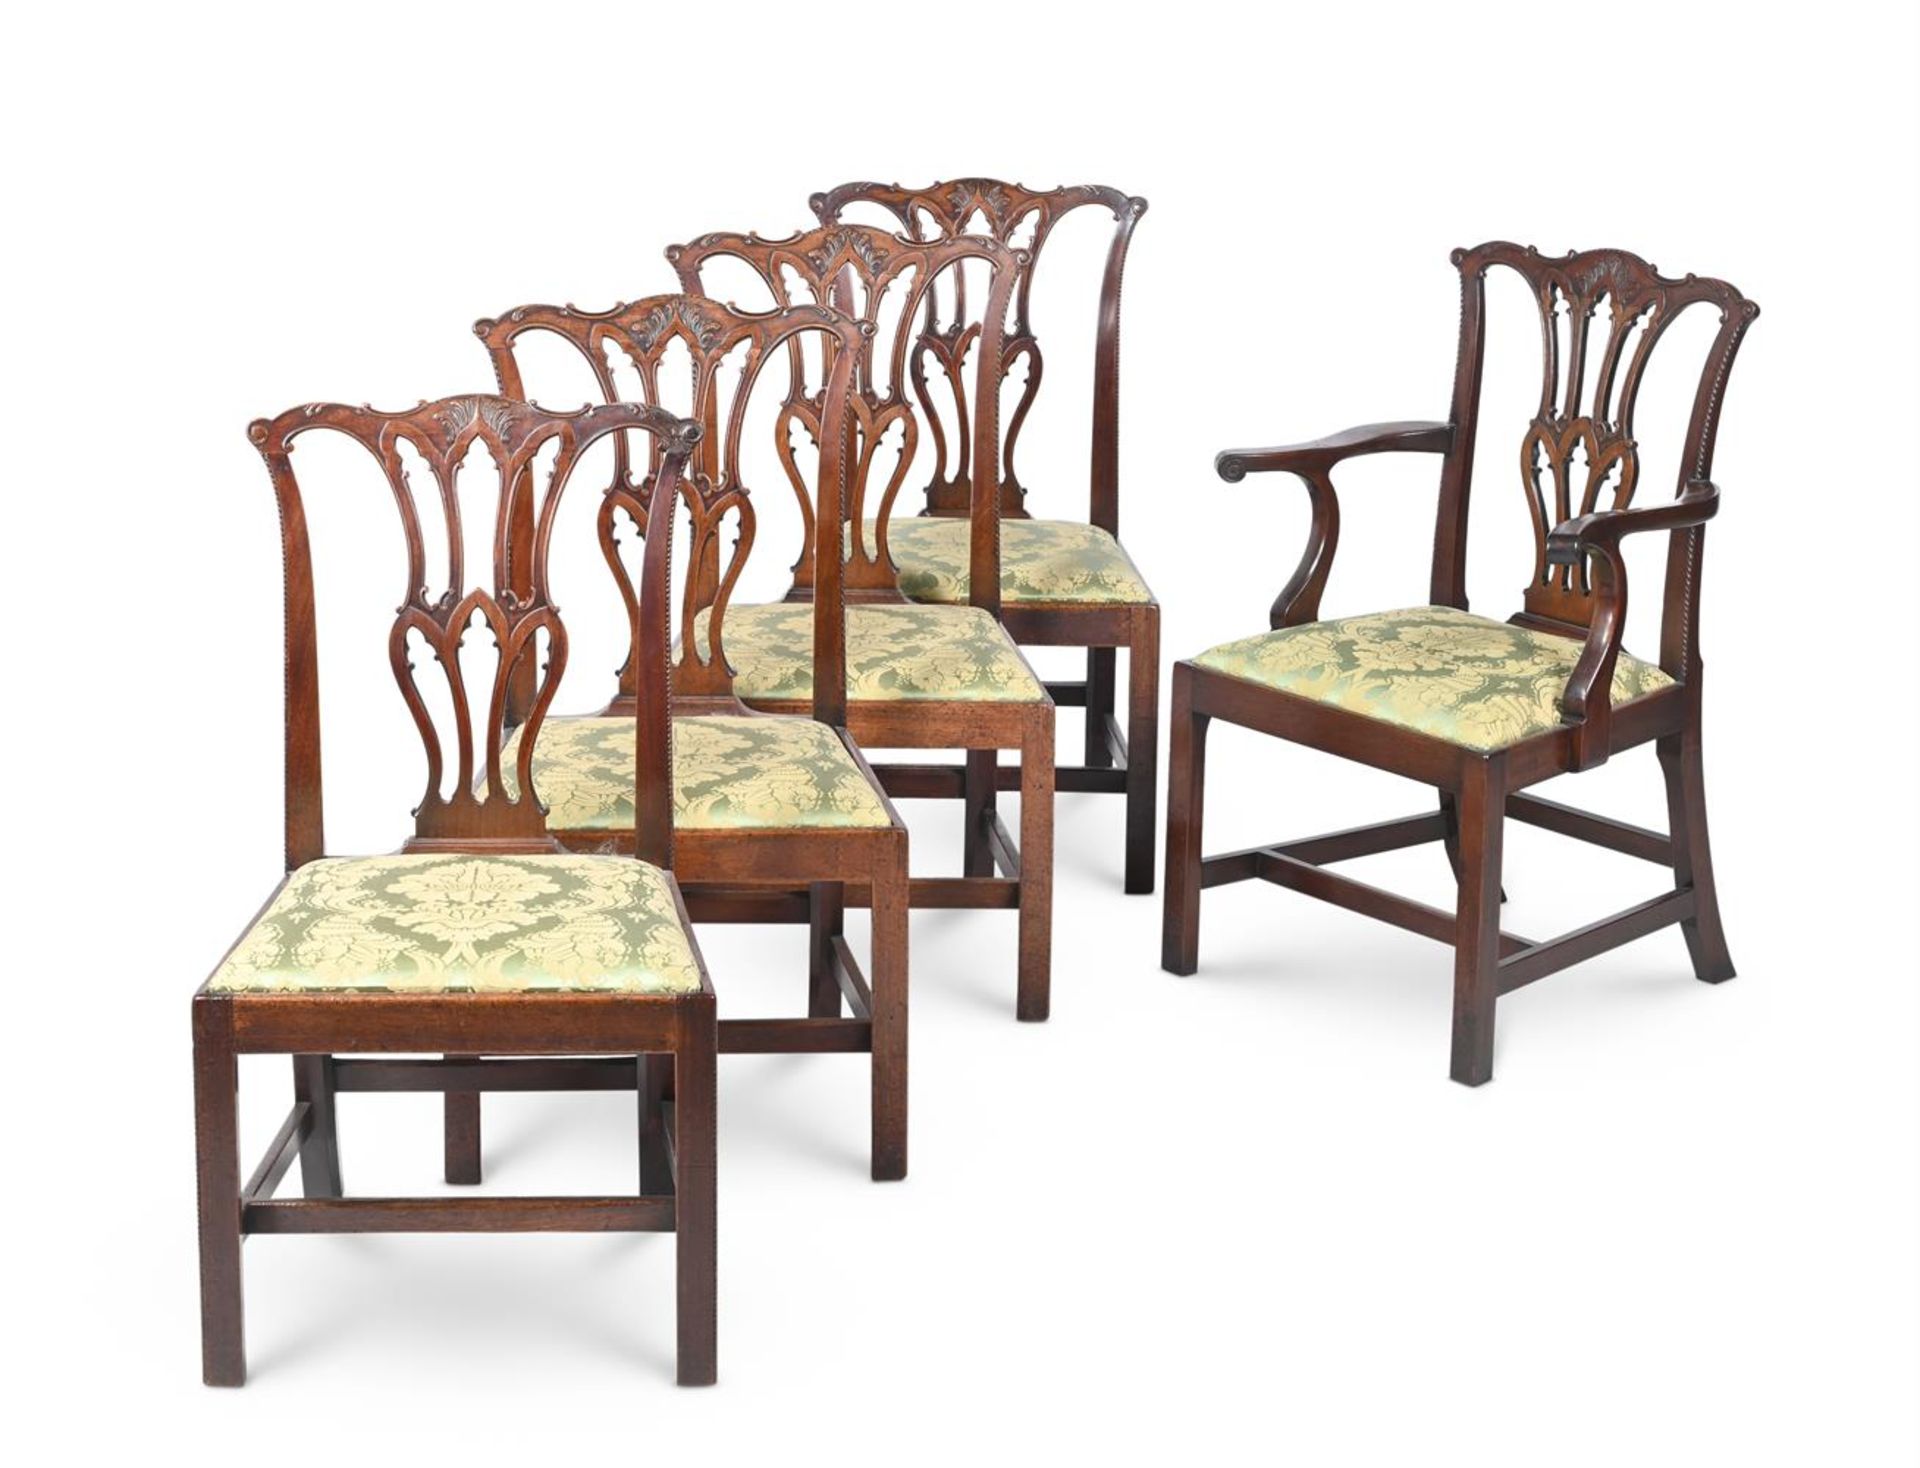 A SET OF TEN GEORGE III MAHOGANY DINING CHAIRS, THIRD QUARTER 18TH CENTURY AND LATER ADAPTED - Image 3 of 5